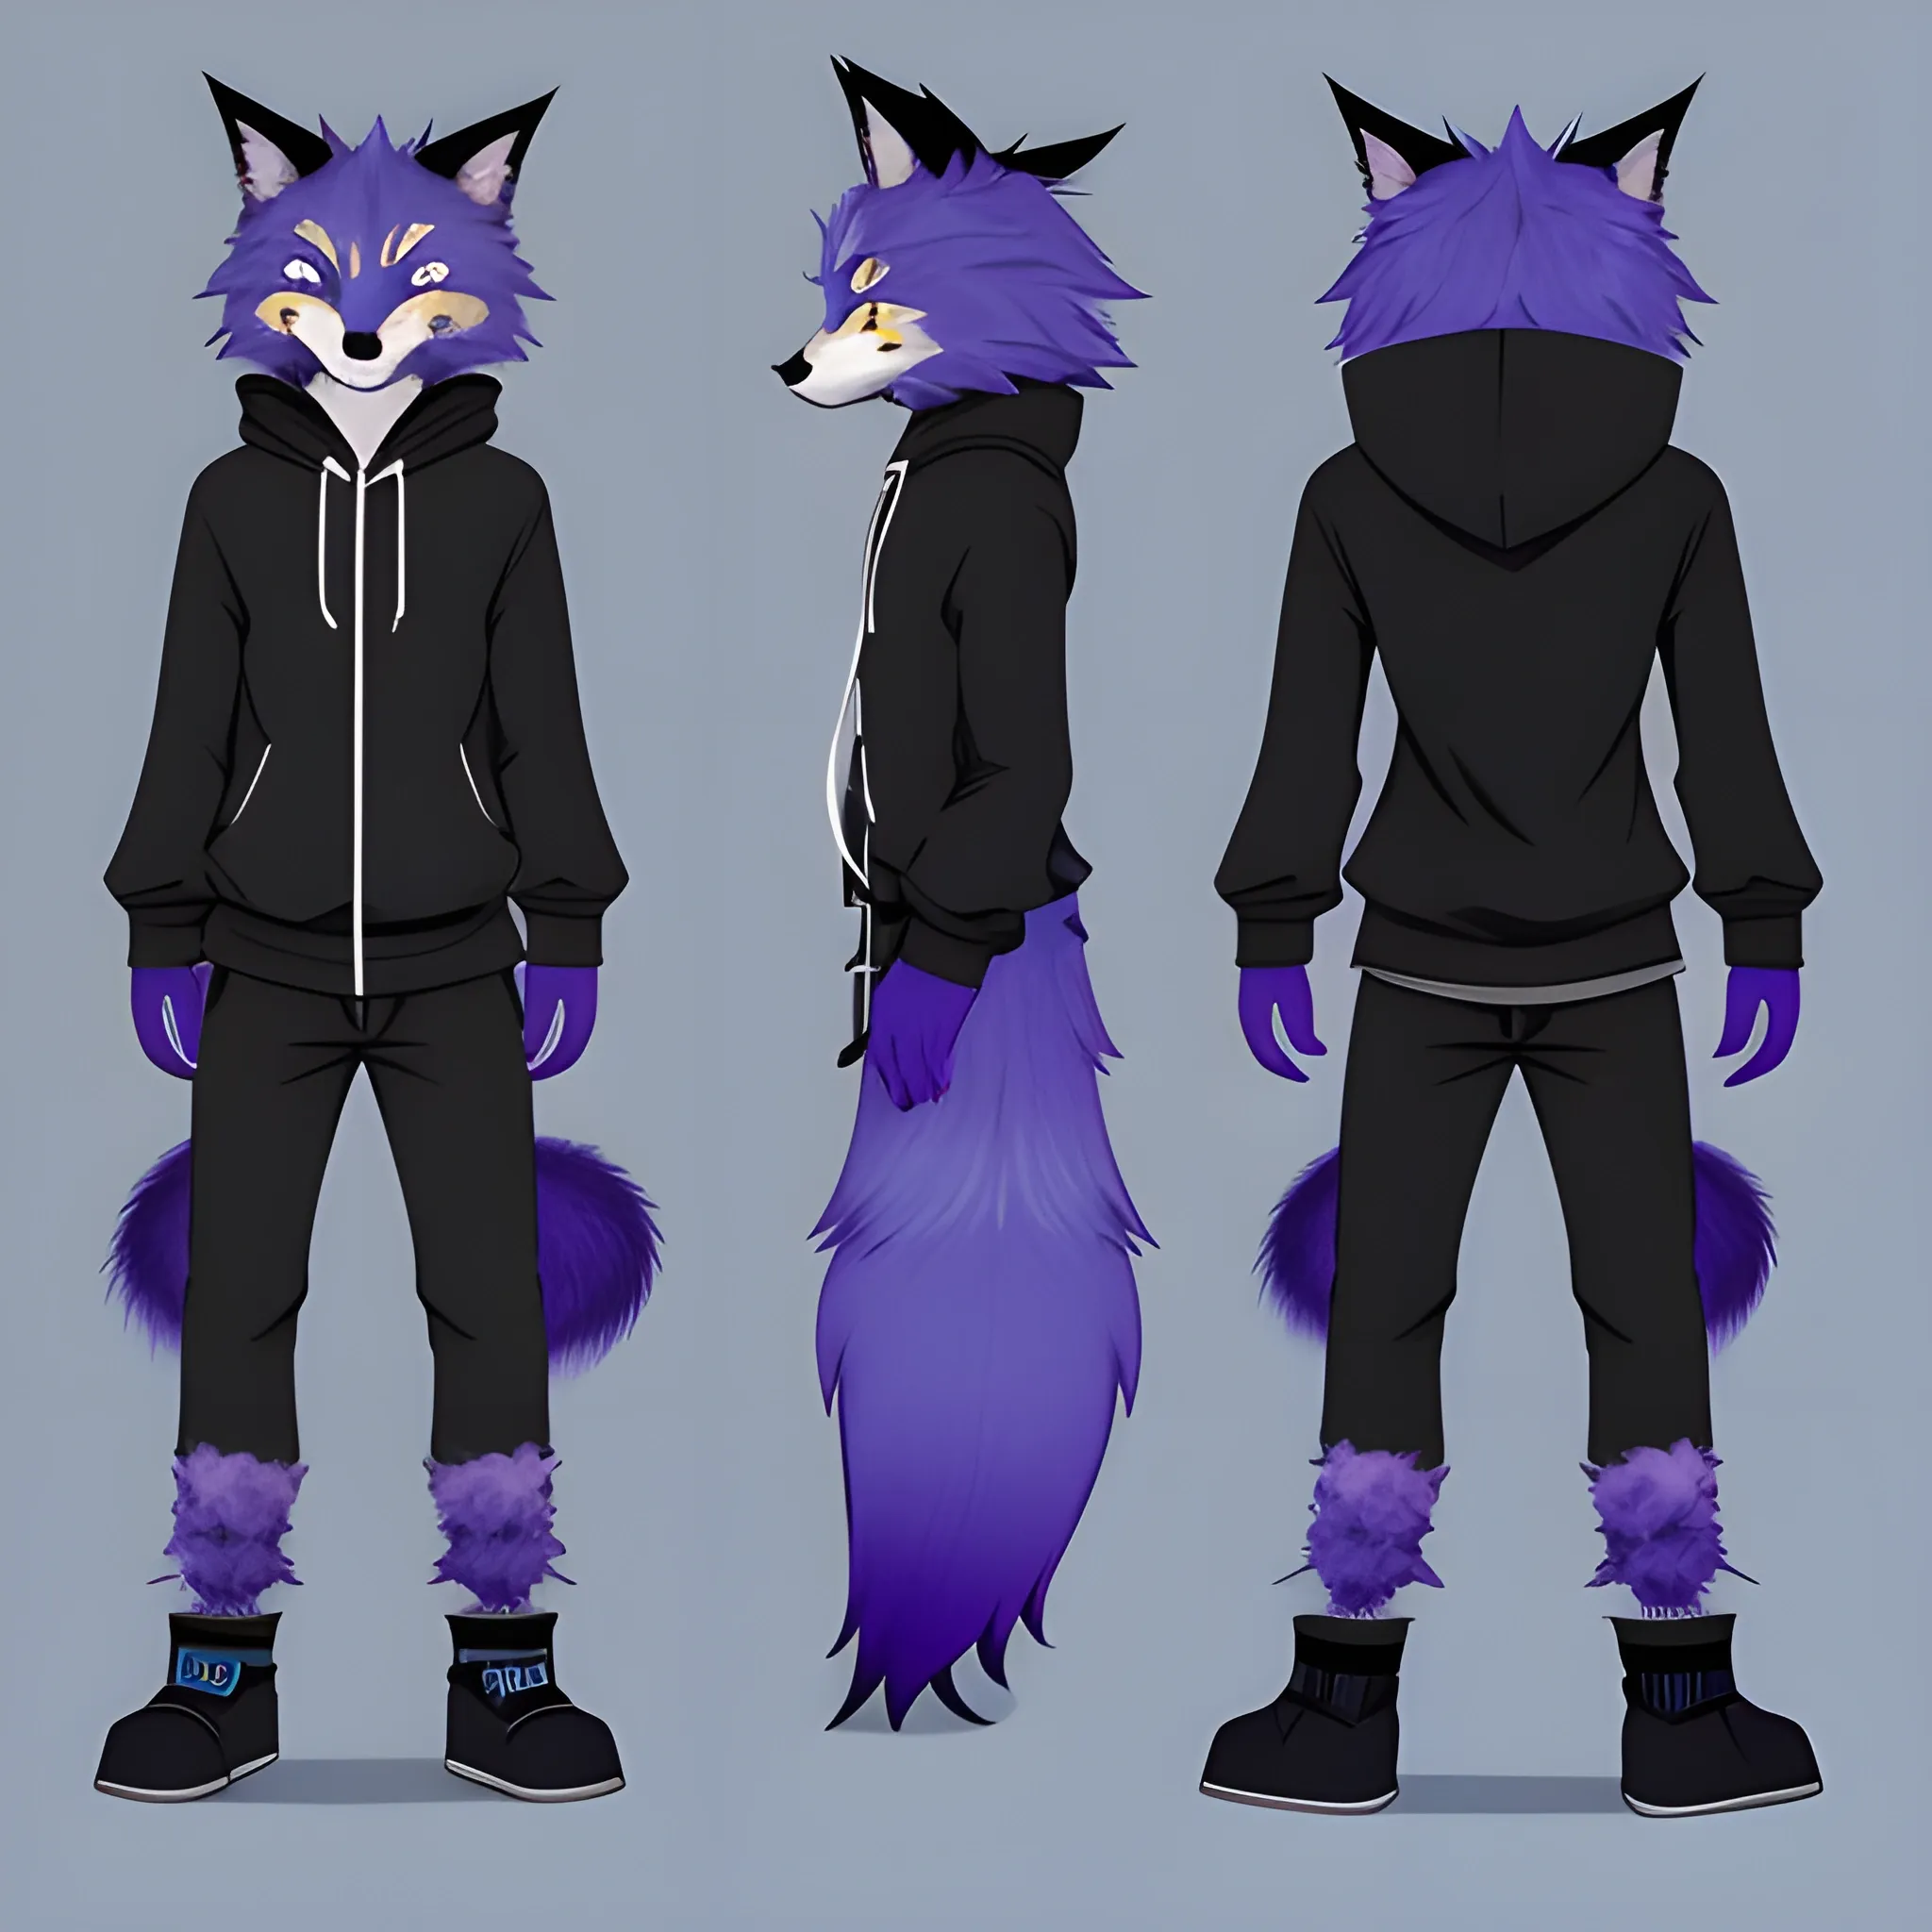 create a furry reference sheet , discription is "His names is xui and he’s a black 10 tailed kitsune with blue markings around his face and the tips of his tails, he’d normally wear gray sweats and a royal blue hoodie with black gloves he’d also have neck length hair that’s purple, he has blue eyes along, his claws are black"